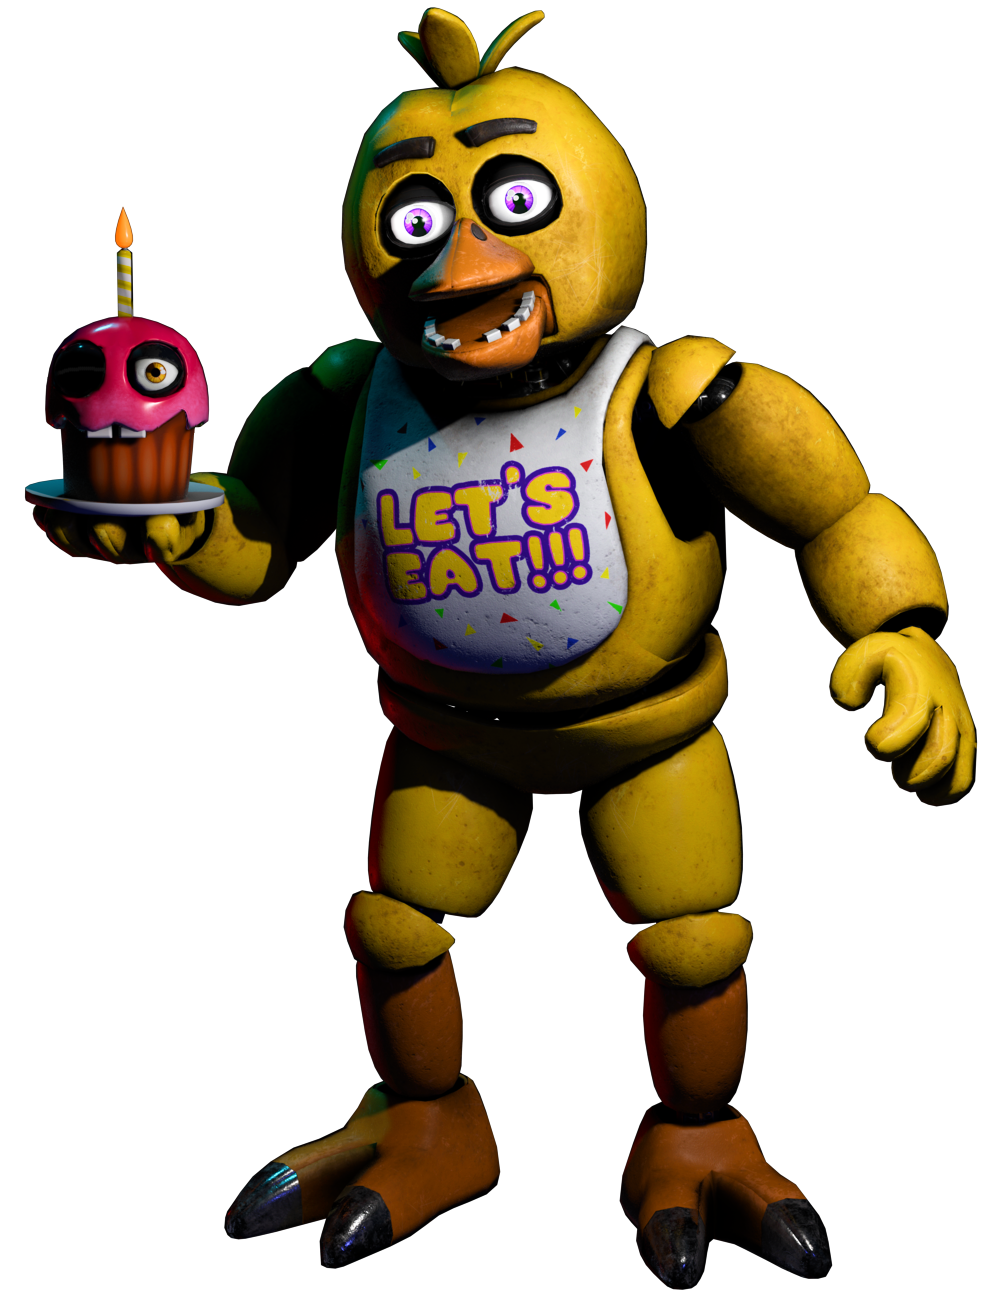 Chibi Withered Chica by XPurplePieX on DeviantArt